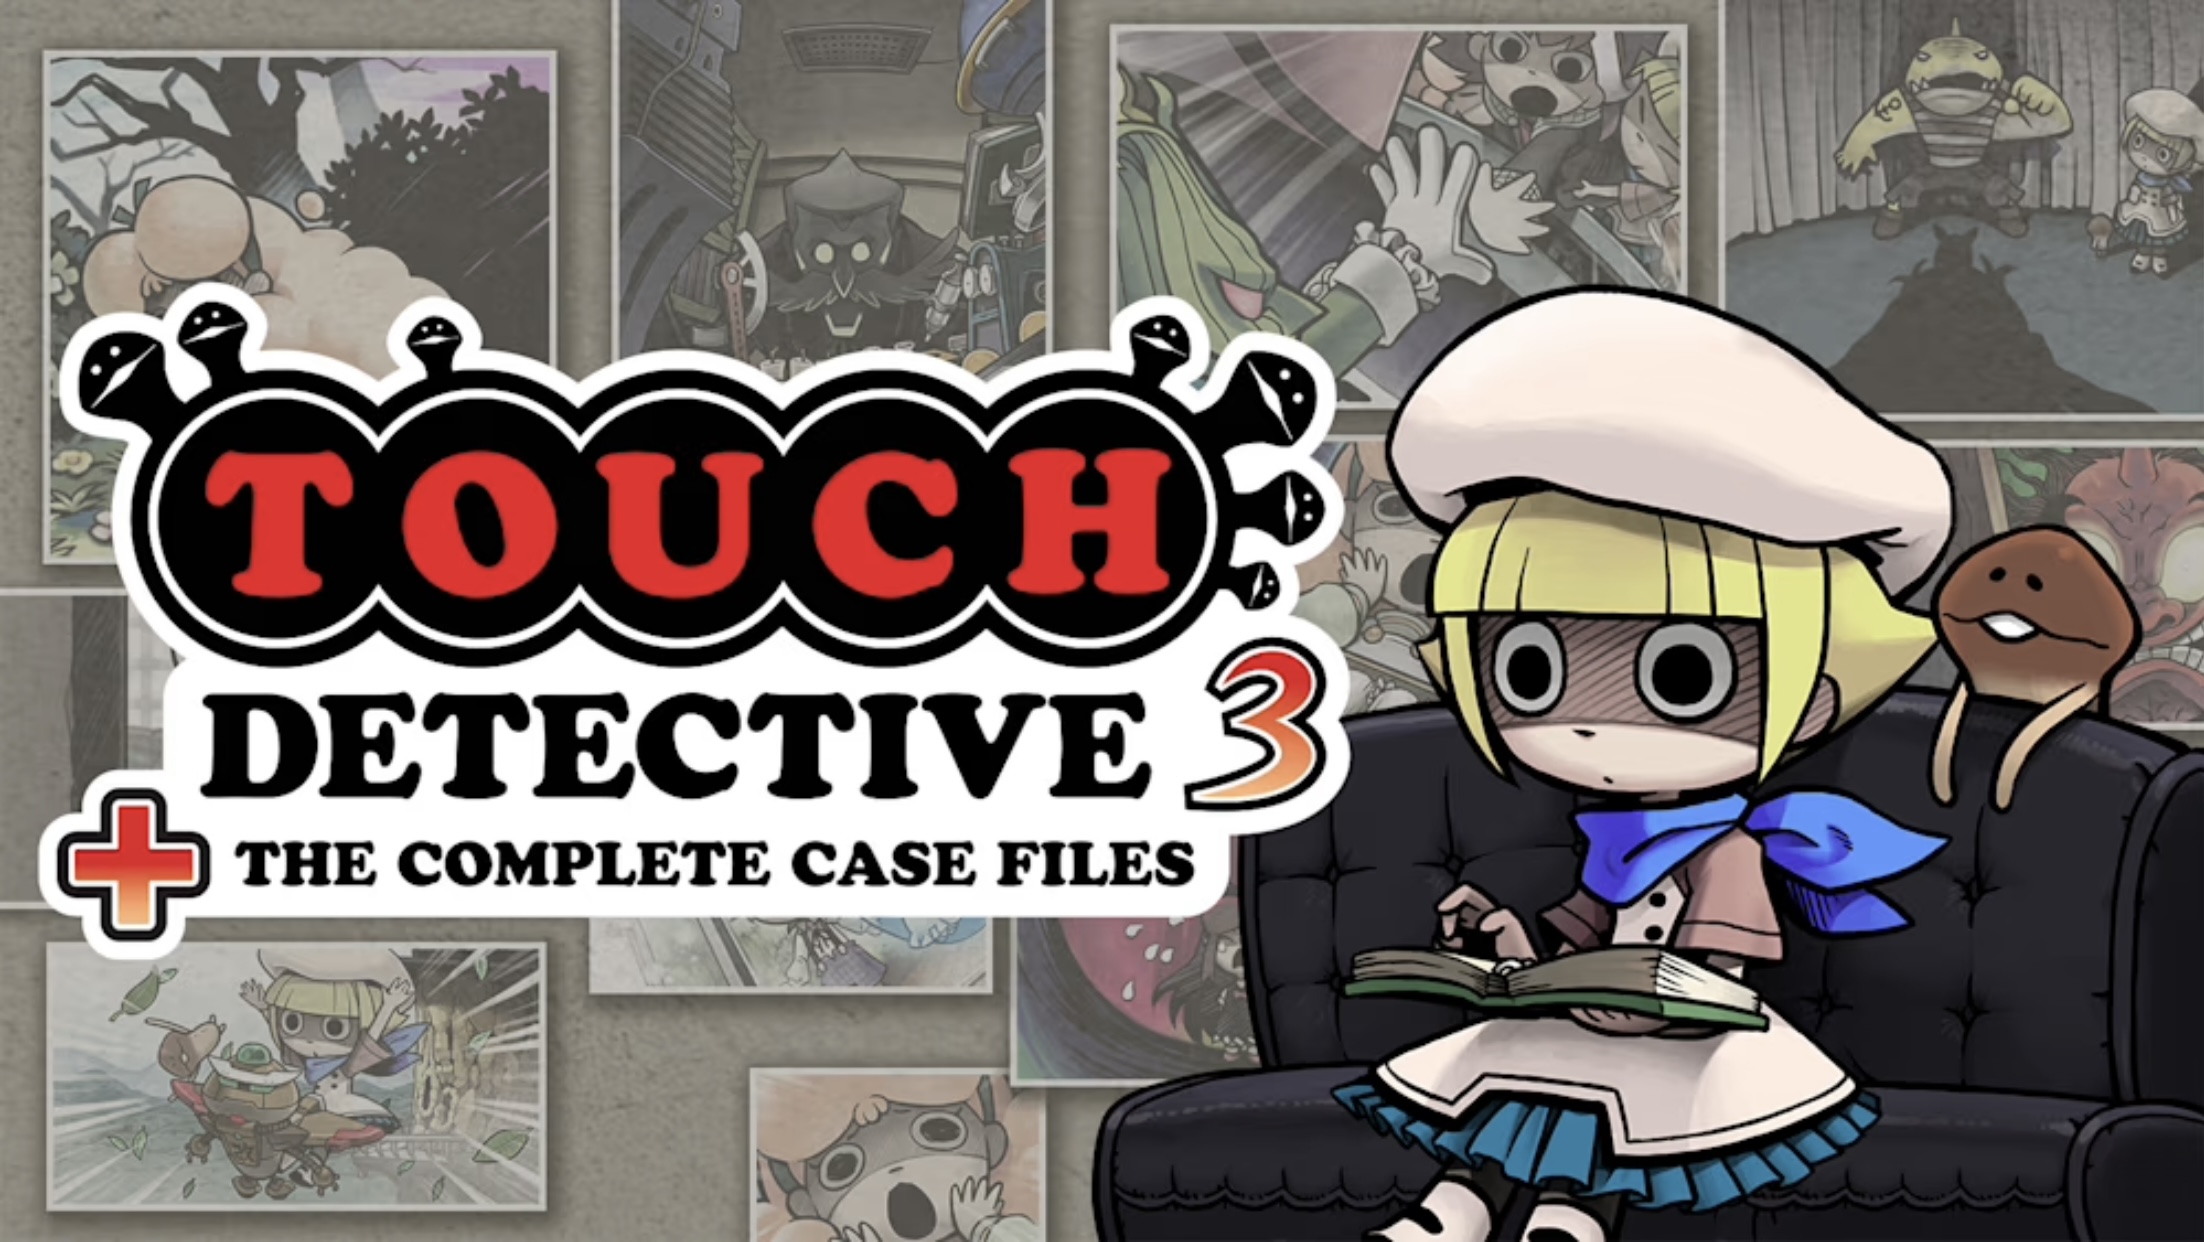 Touch Detective 3 - Upcoming Adventure Game